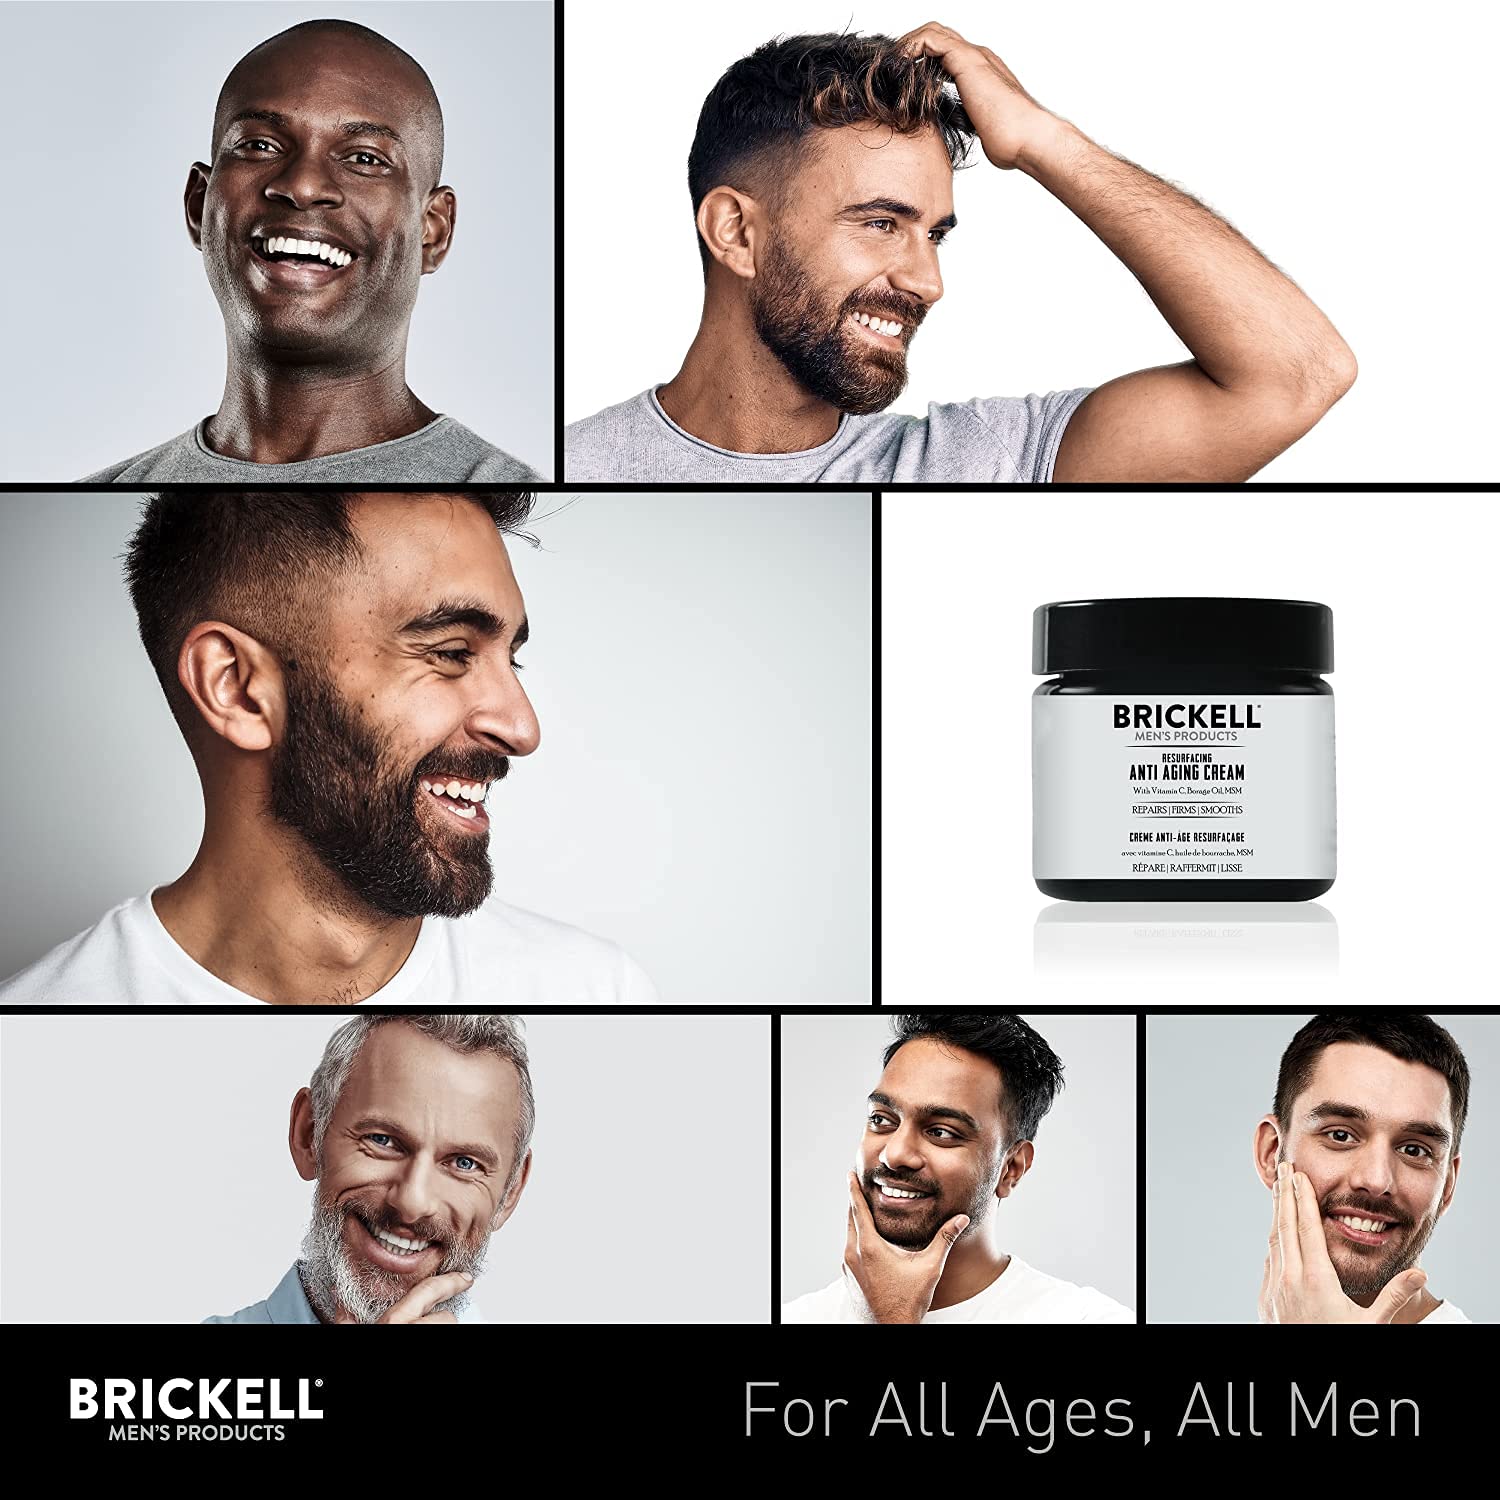 Brickell Men's Products Resurfacing Anti-Aging Cream - 2 Ounce-2